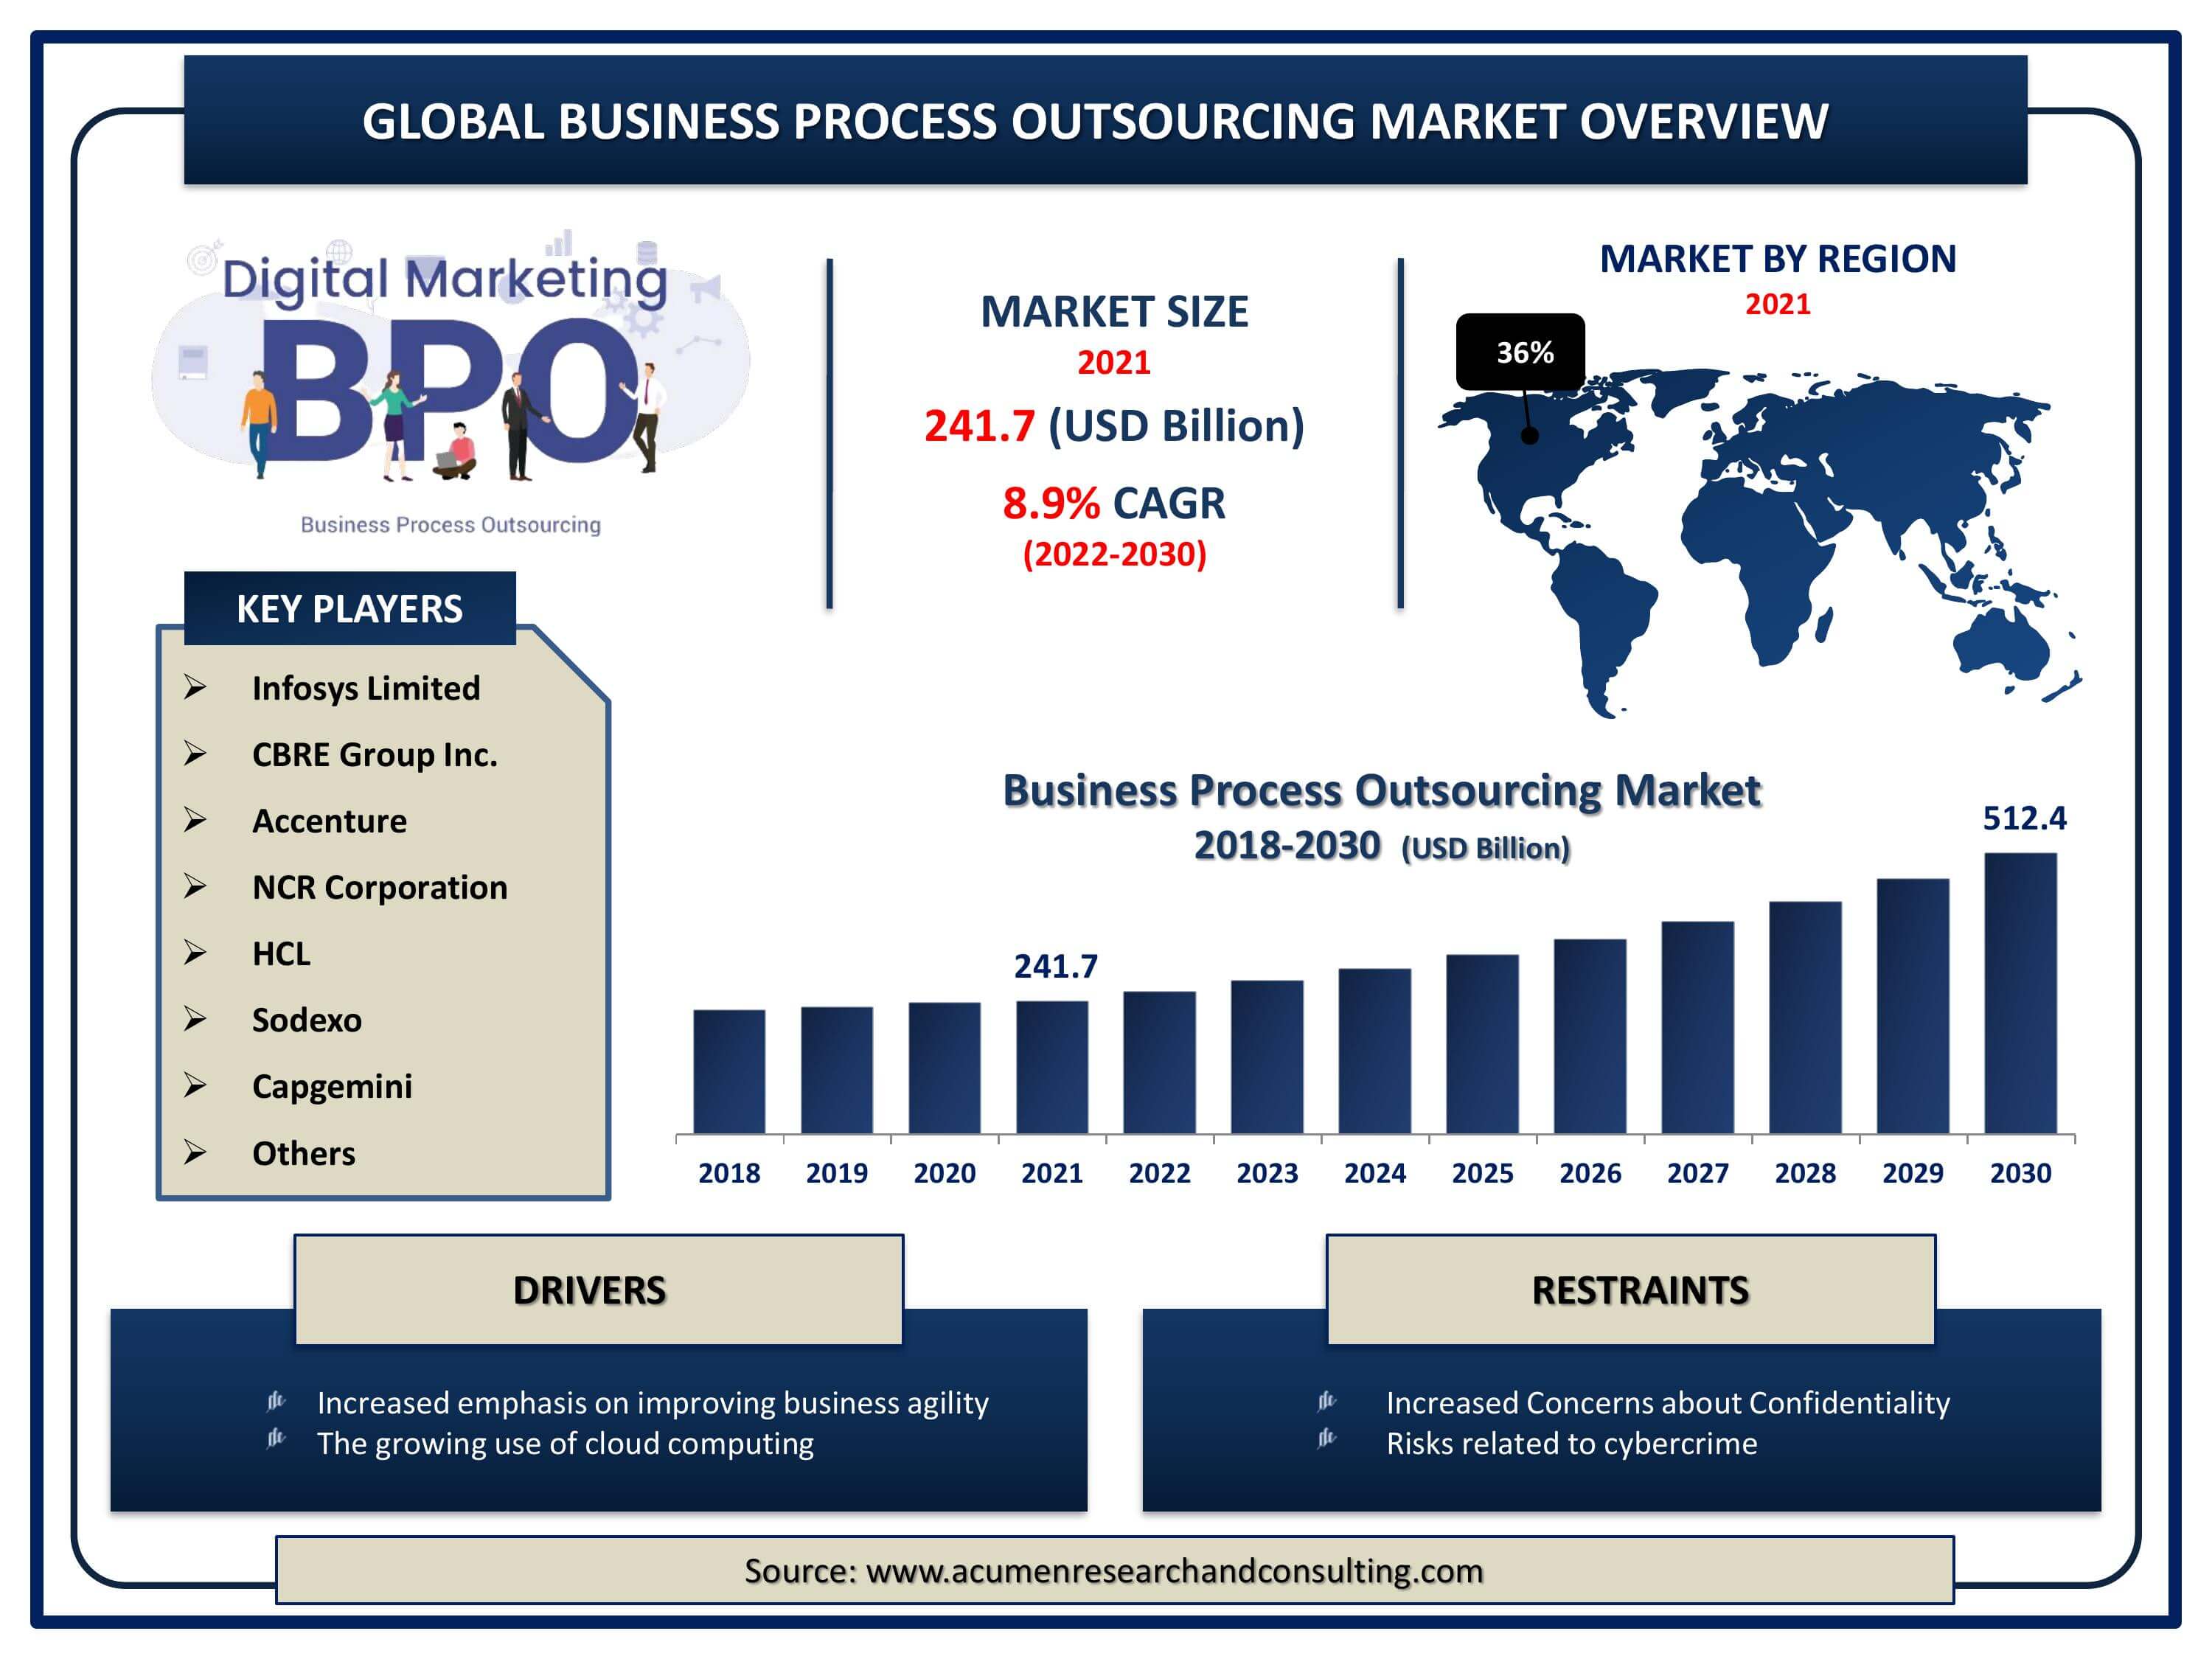 Global business process outsourcing market revenue is estimated to expand by USD 512.4 billion by 2030, with a 8.9% CAGR from 2022 to 2030.